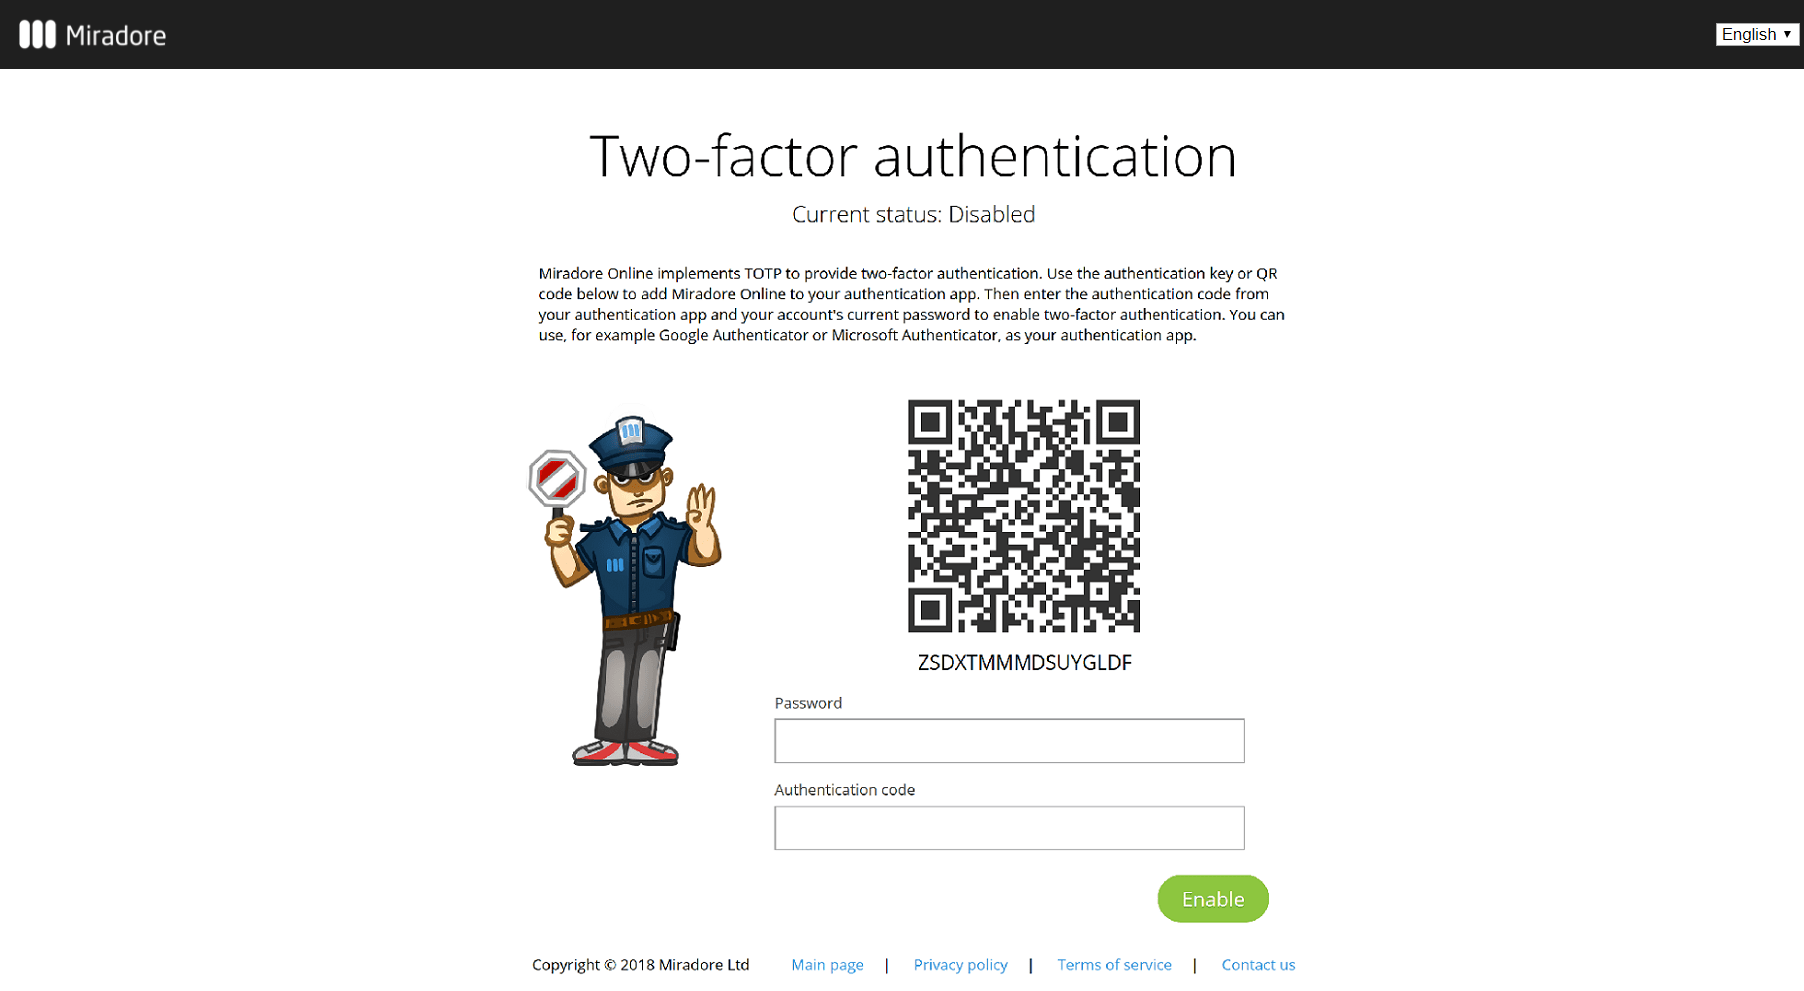 Enabling two-factor authentication in Miradore.